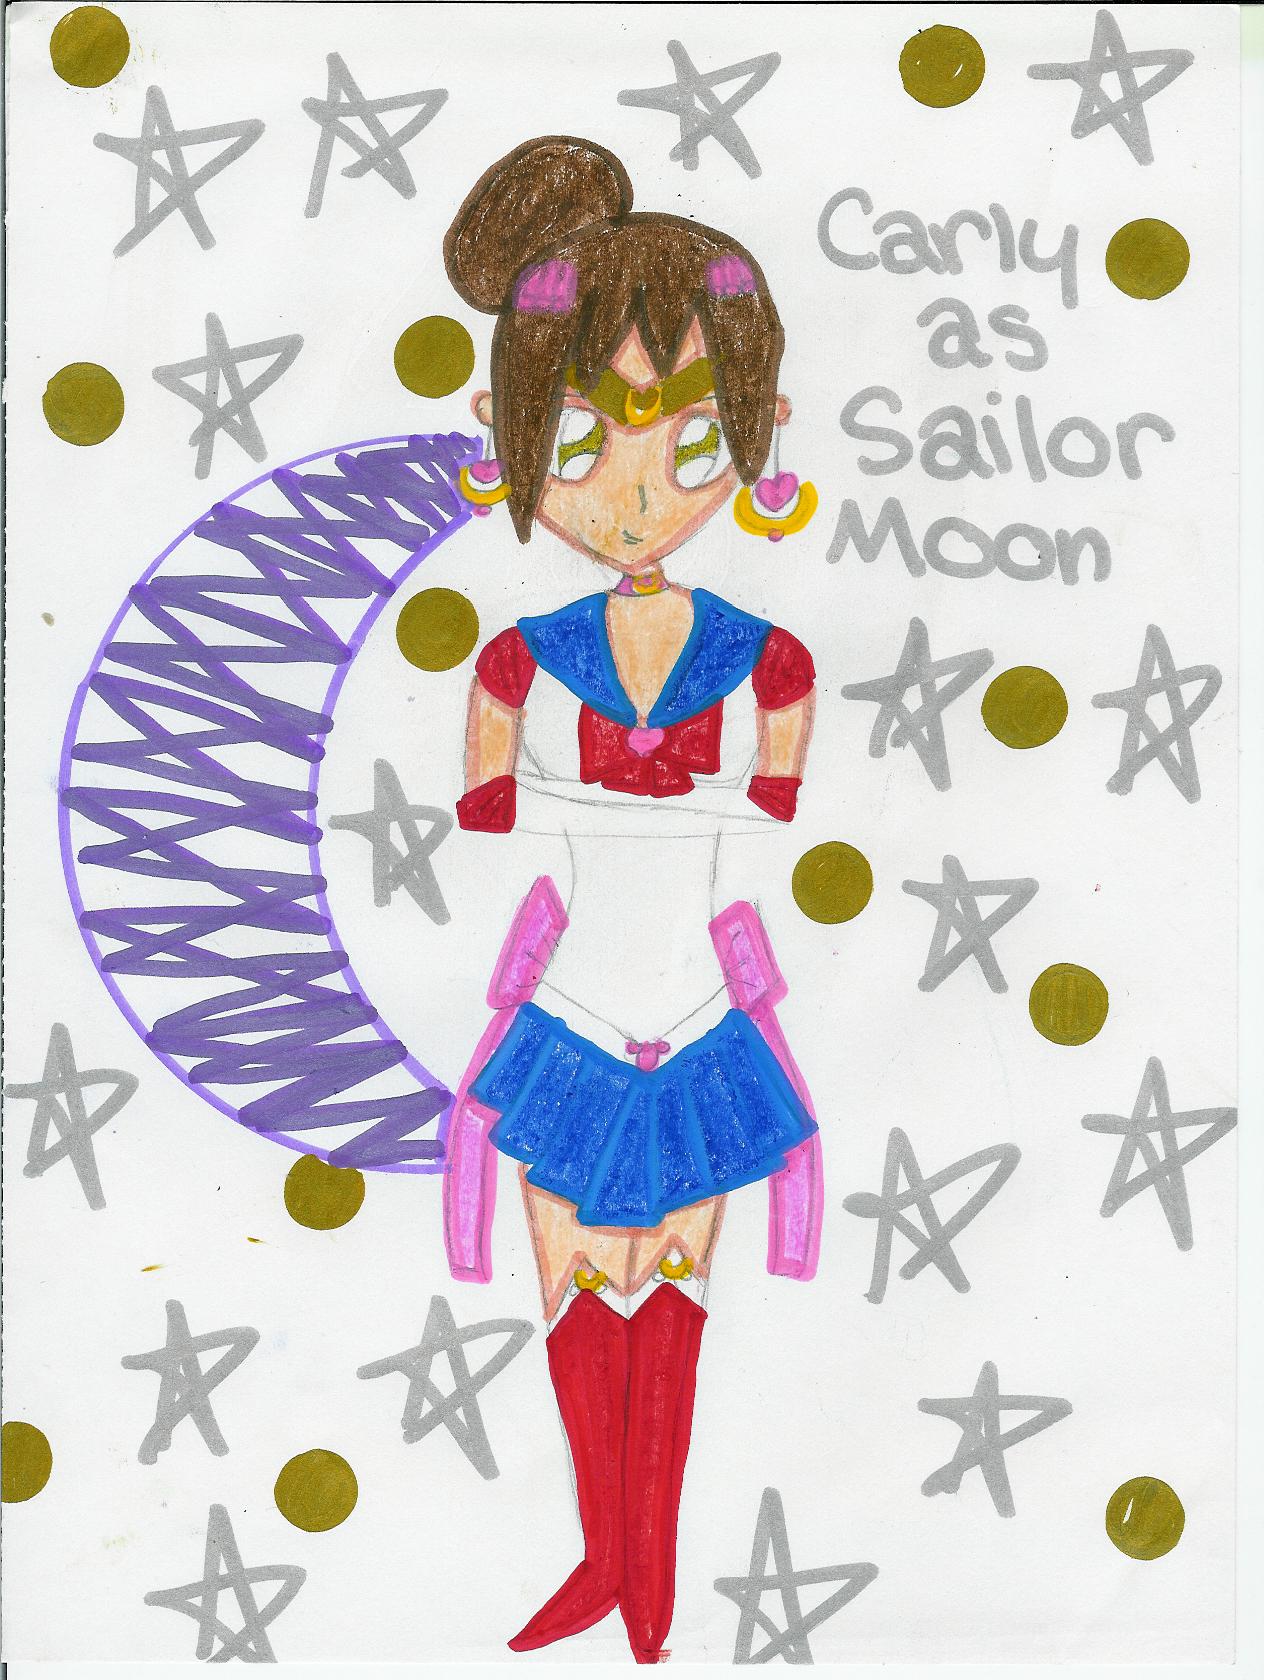 Carly as Sailor Moon by CrystallineAngel